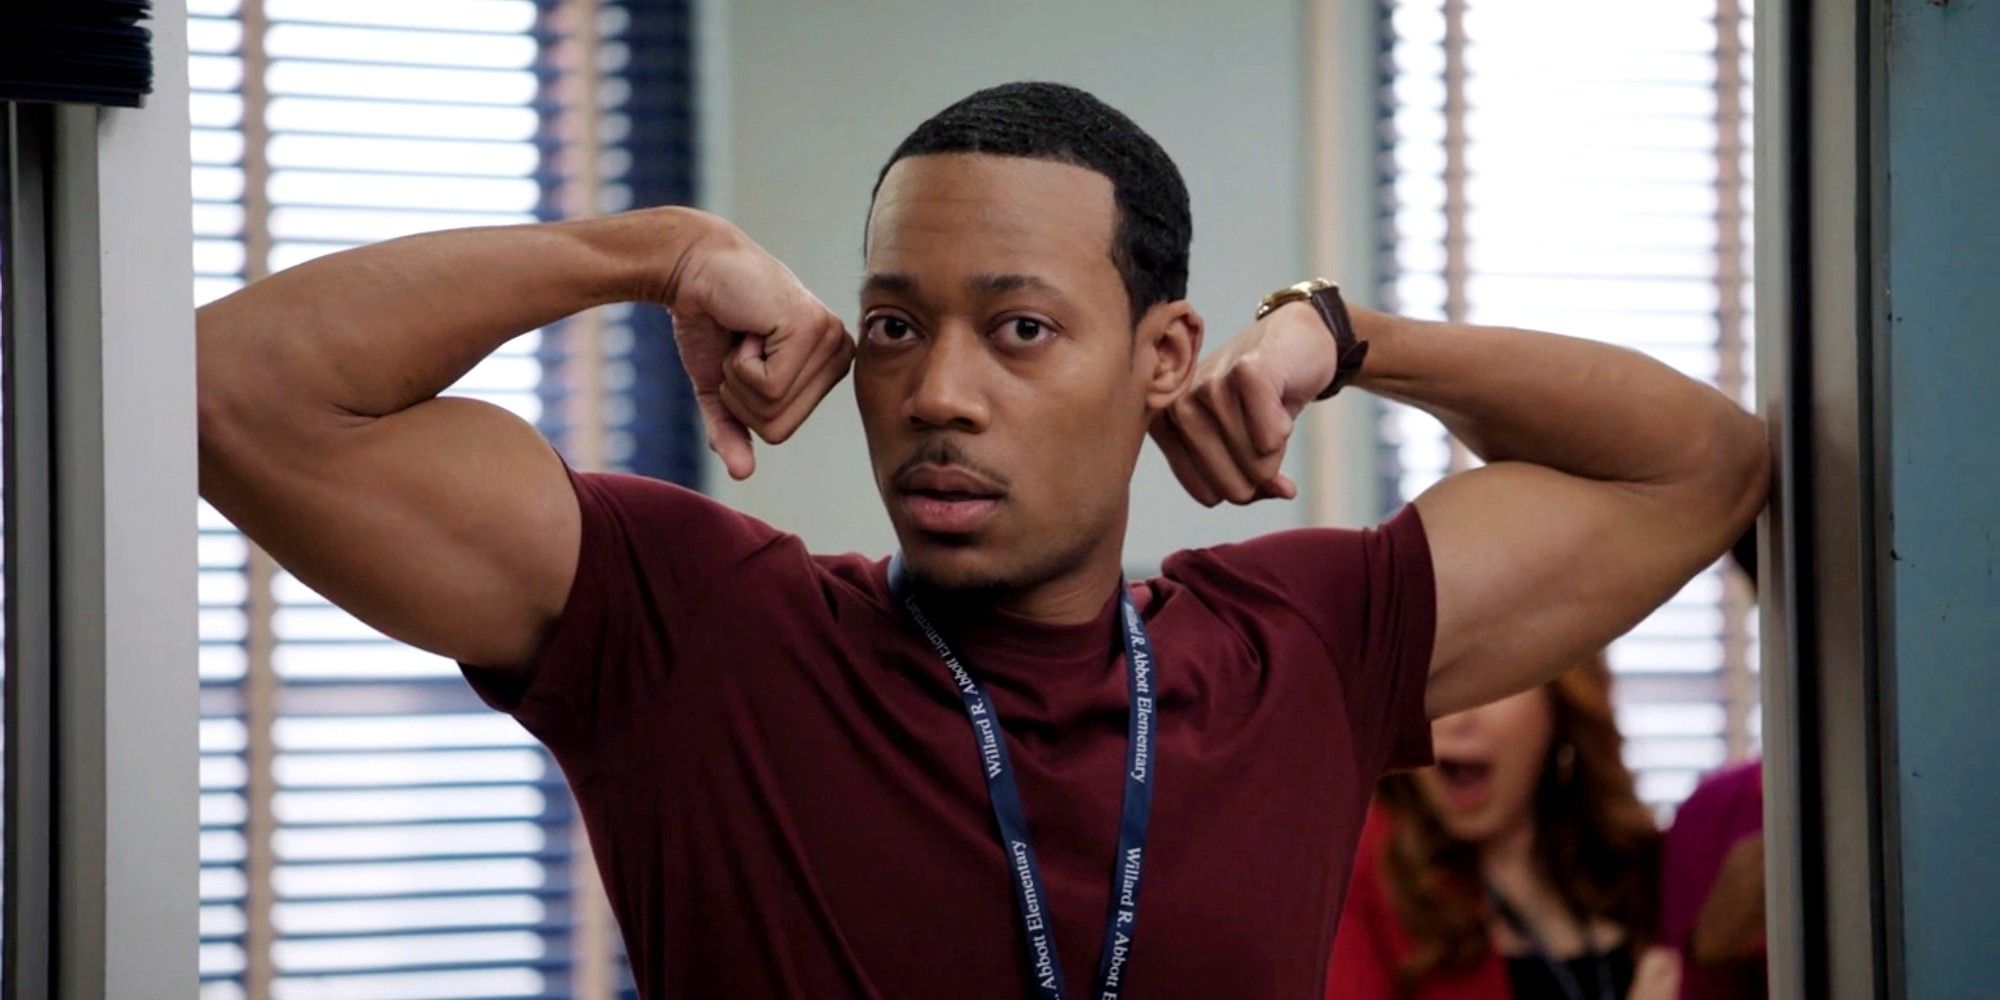 Gregory (Tyler James Williams) flexes his biceps while looking at the camera in the Abbott Elementary season 3 premiere.